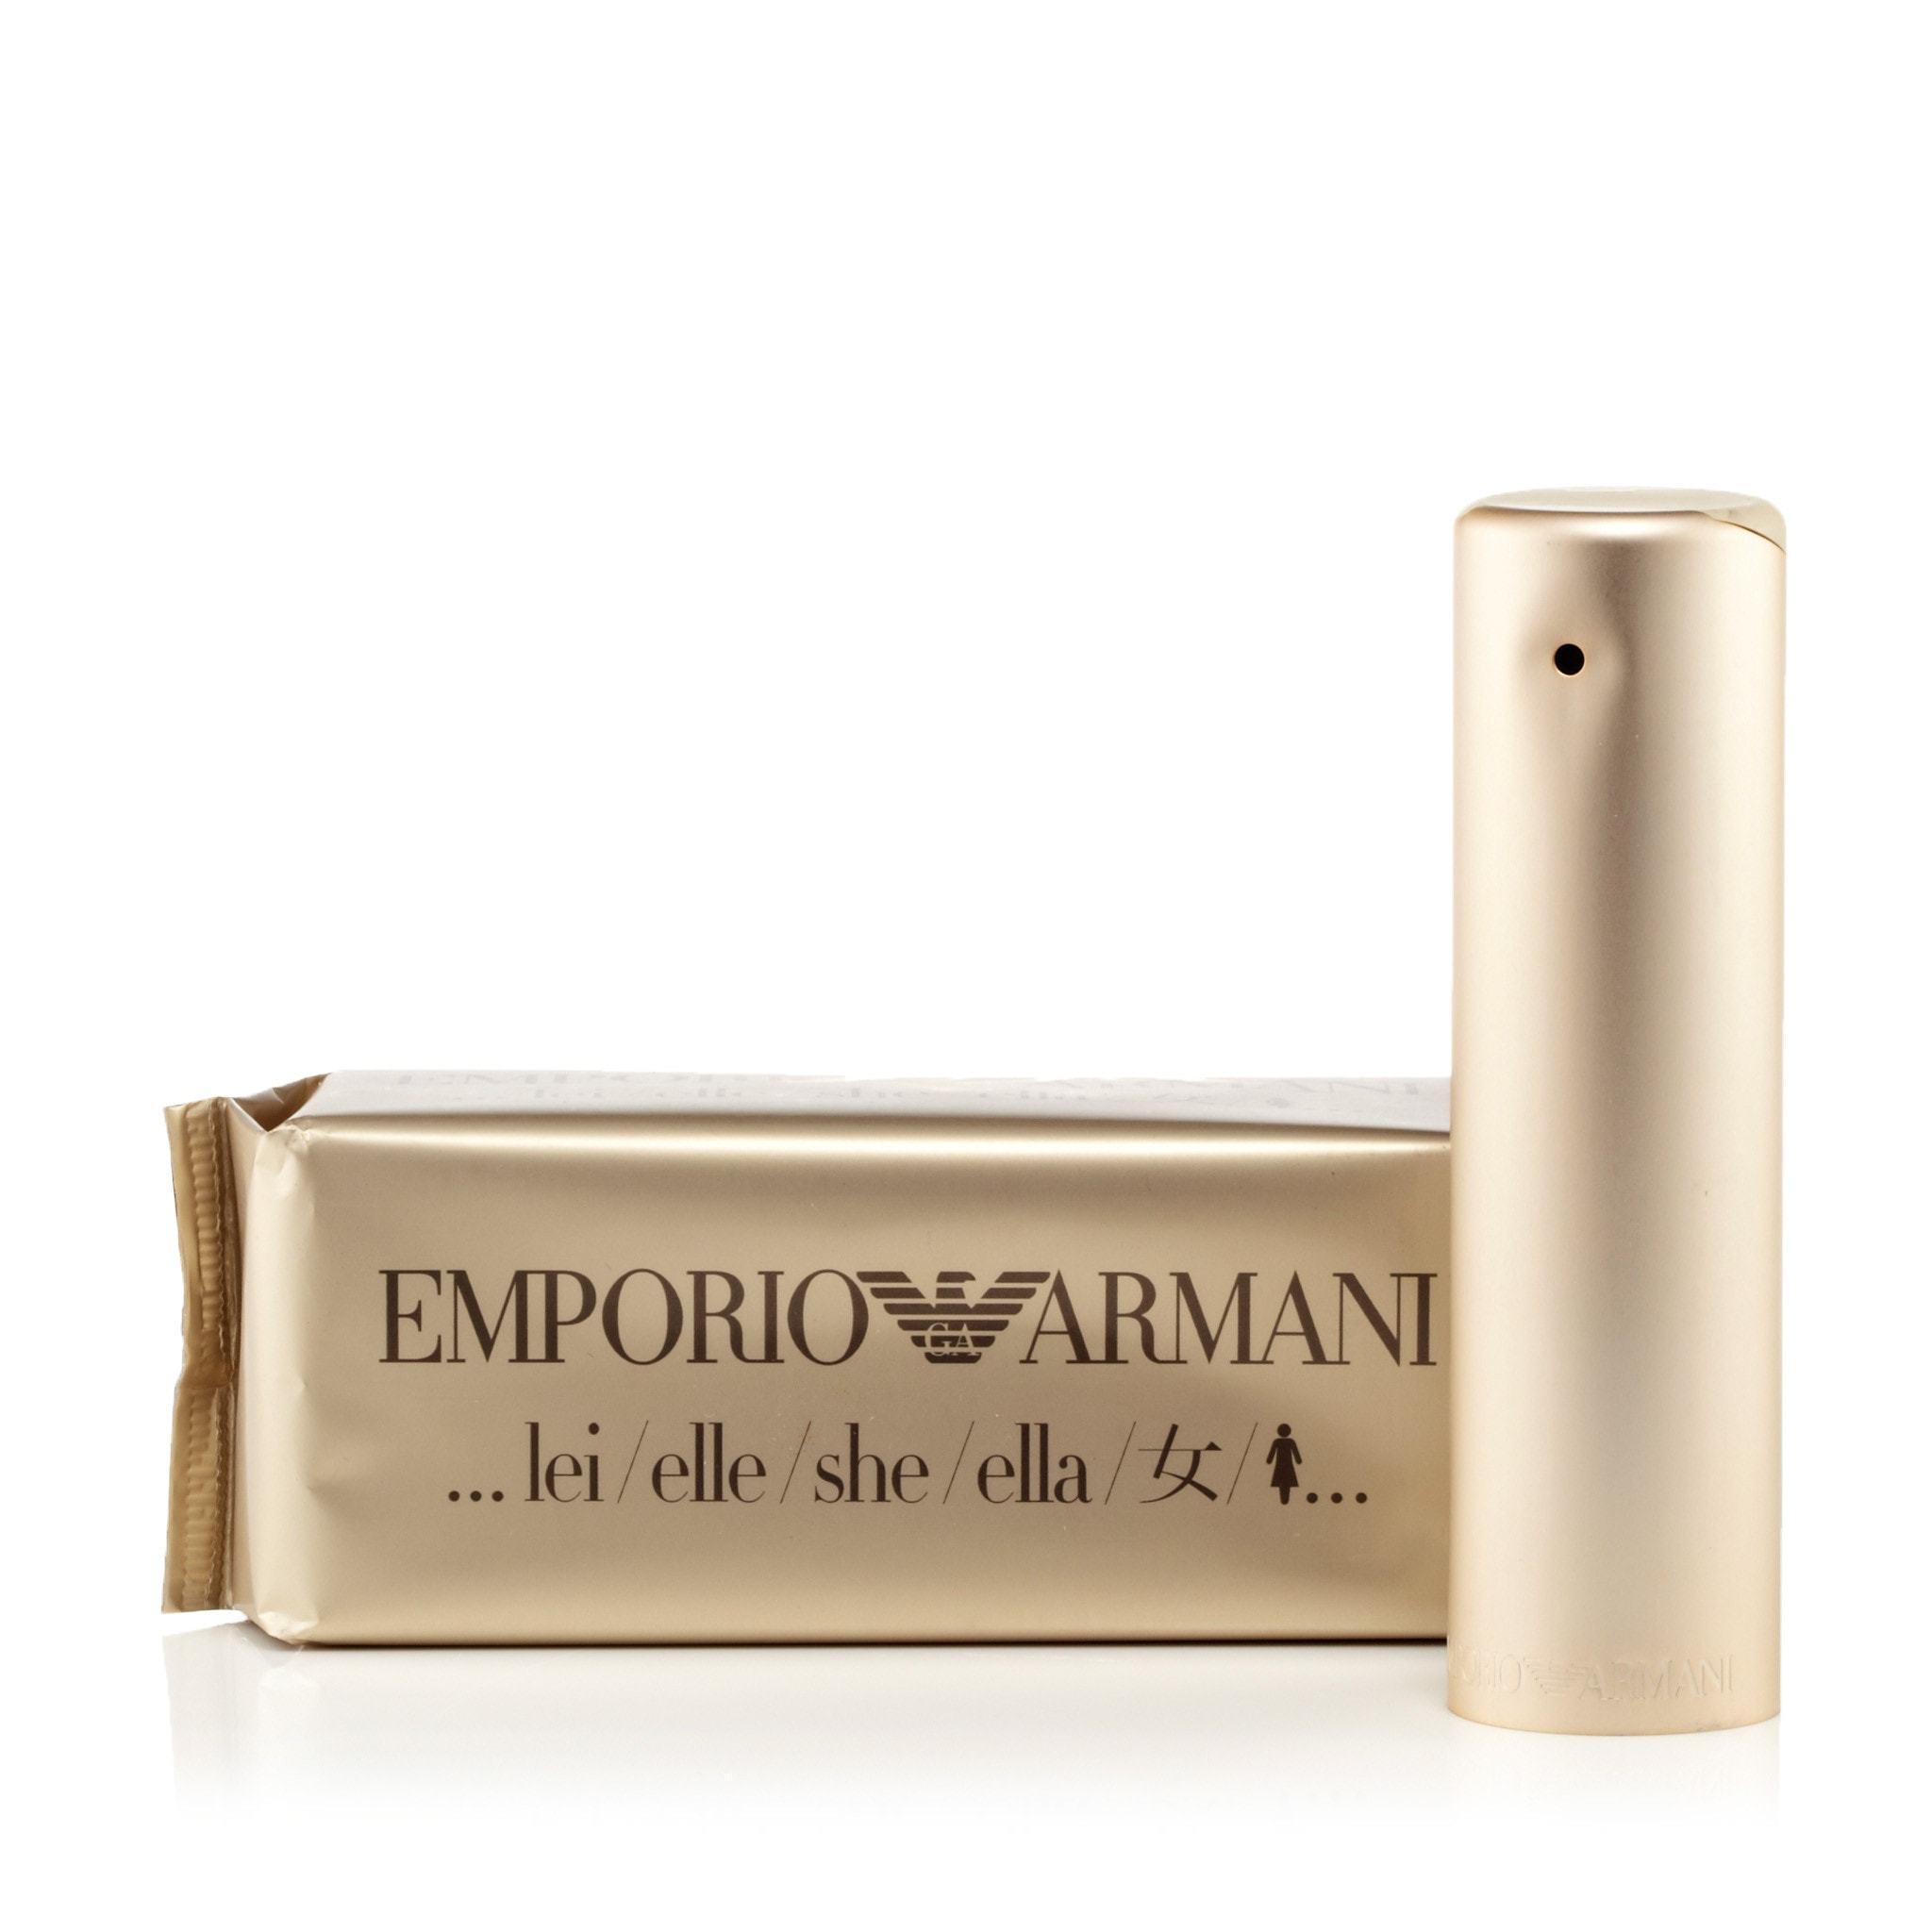 van nu af aan Bounty Augment Emporio Armani EDP for Women by Giorgio Armani – Fragrance Outlet